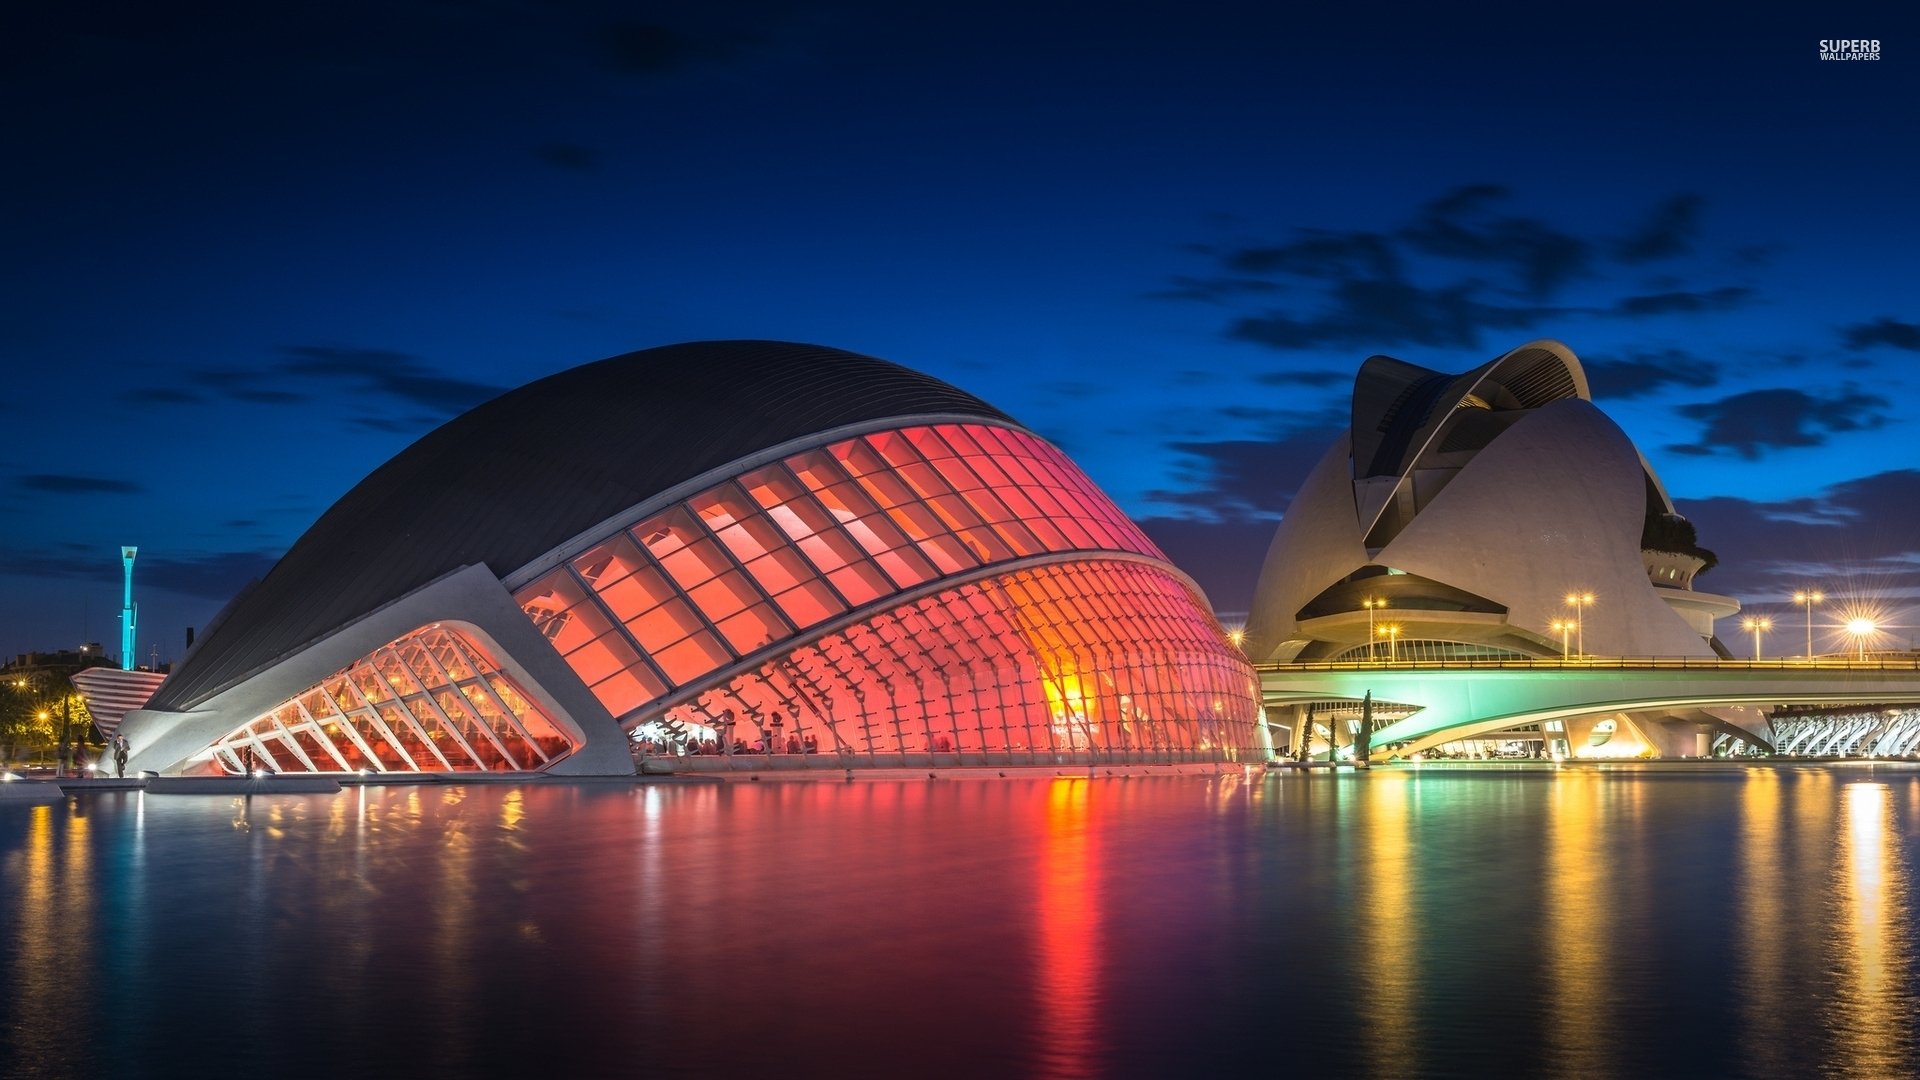 City Of Art And Sciences In Valencia Wallpaper - City Of Arts And Sciences - HD Wallpaper 